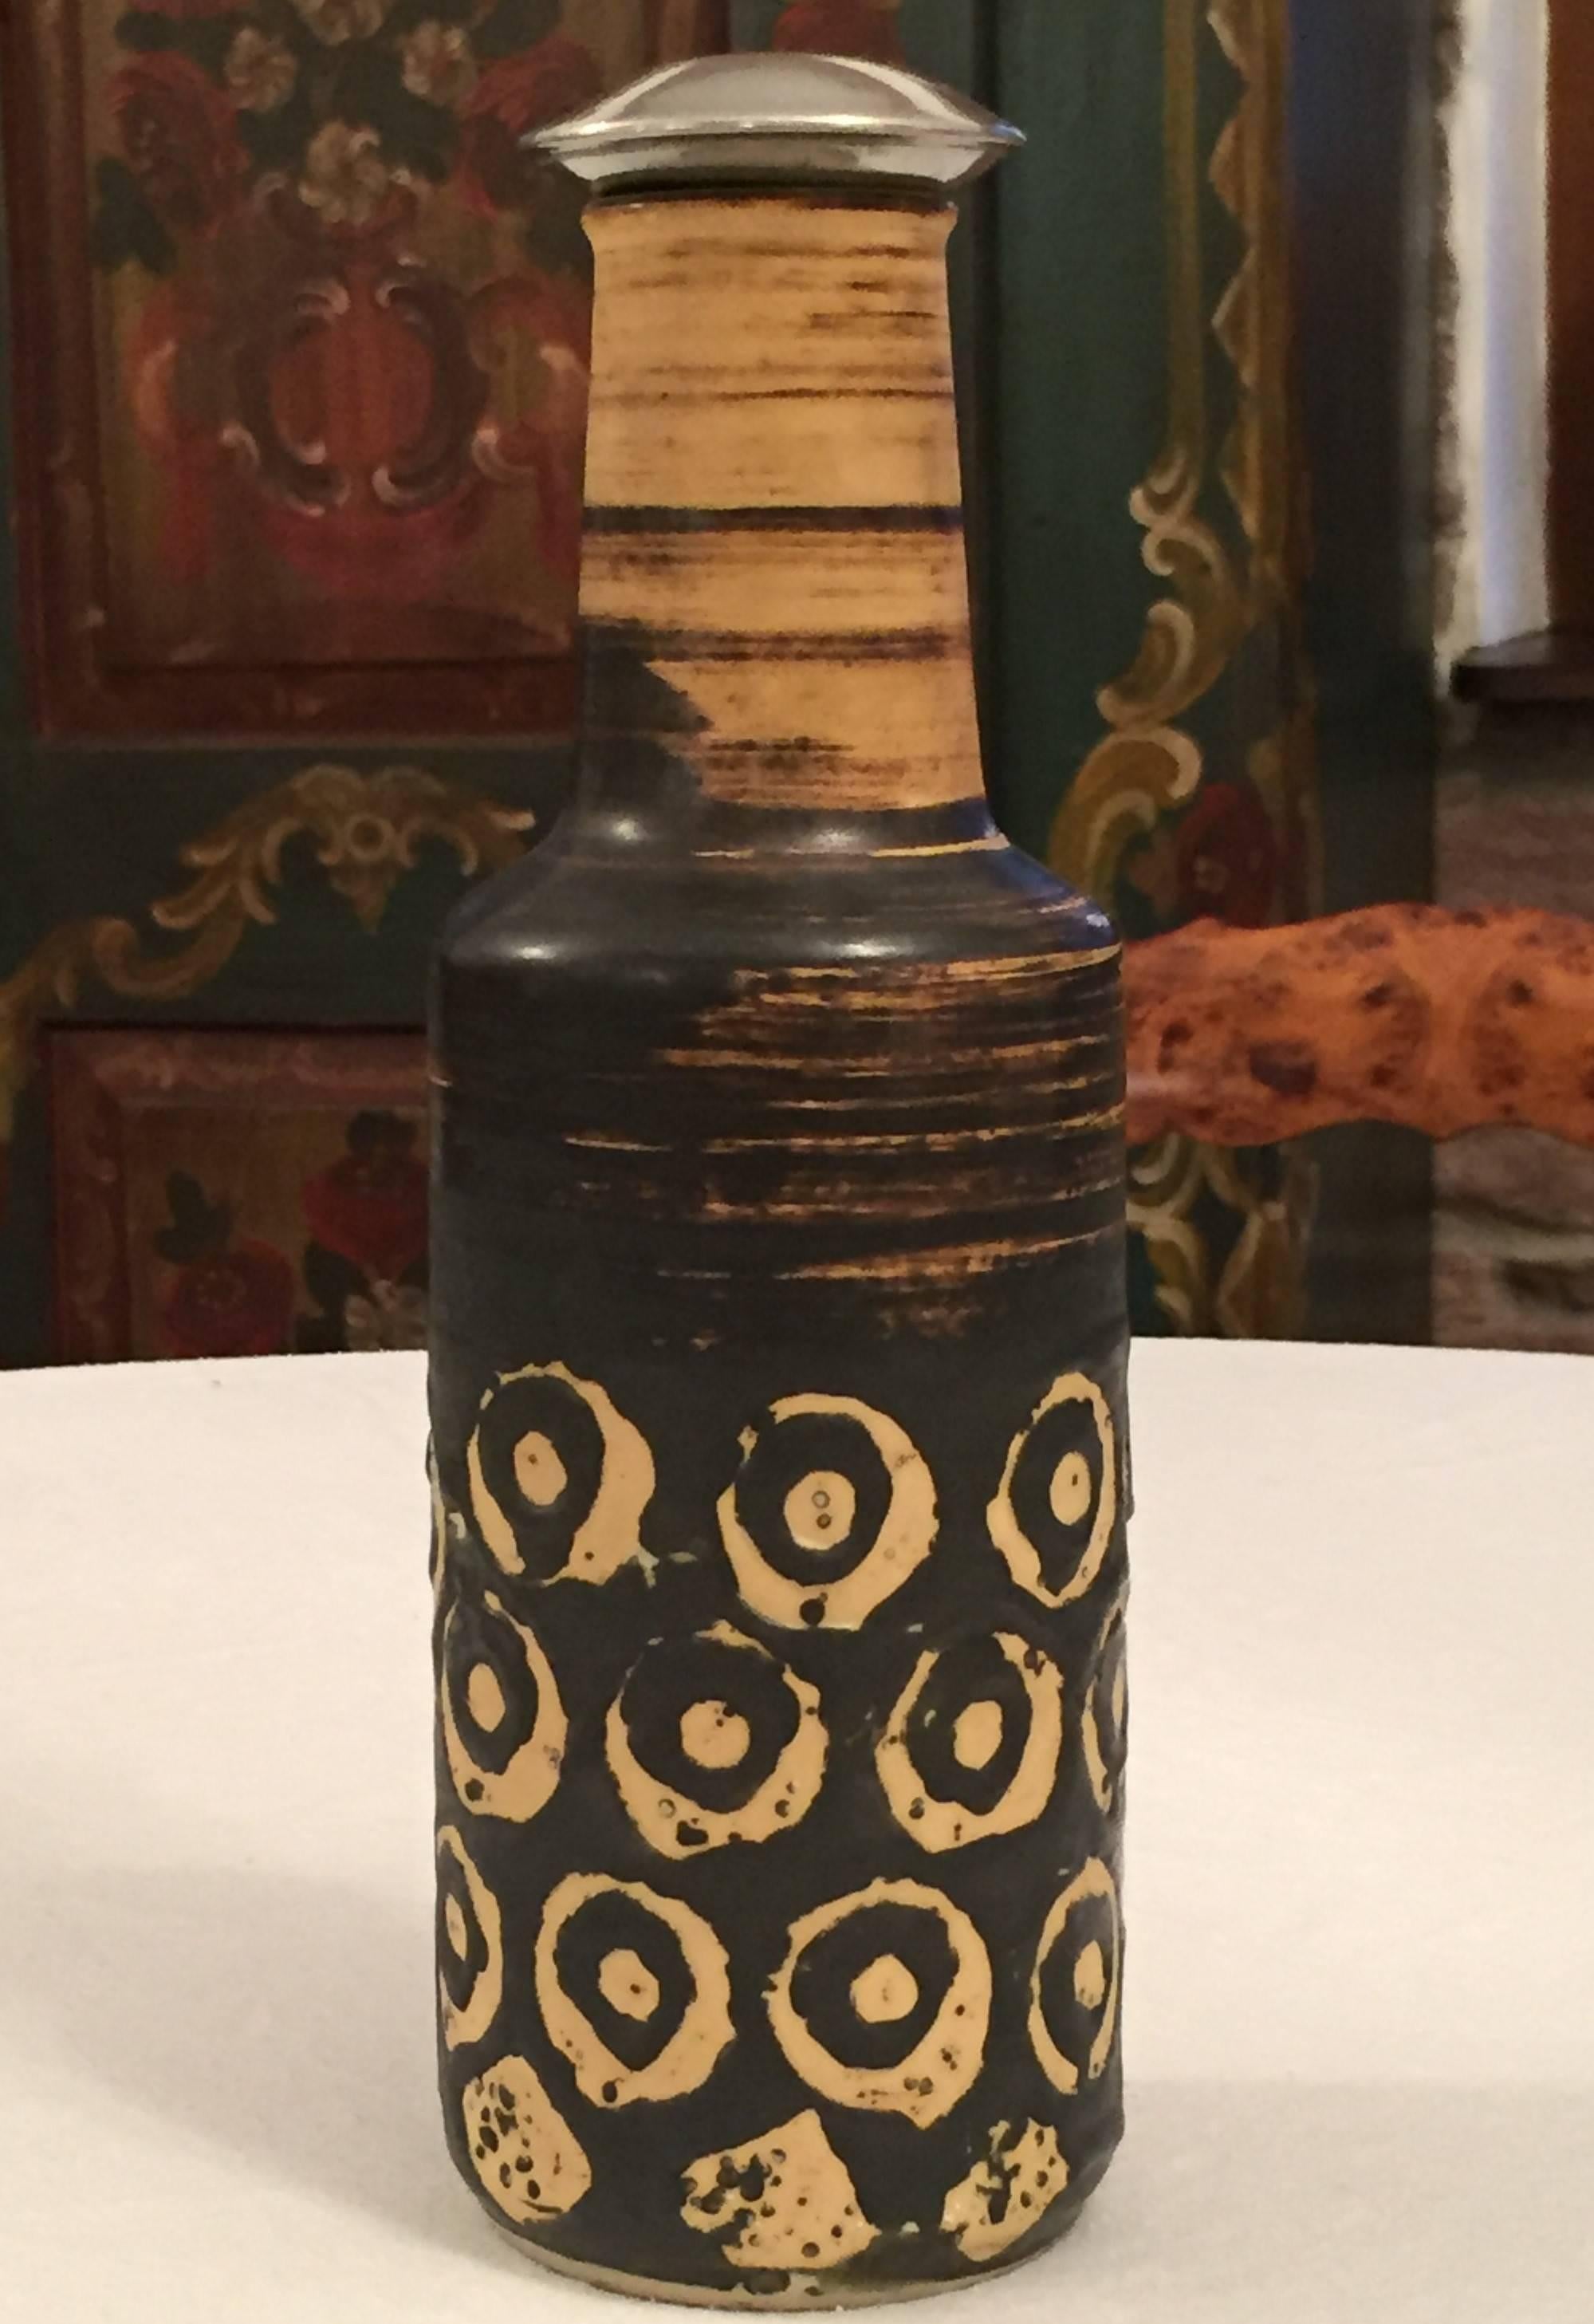 1950s Art Pottery ceramic vase or bottle by Germany. Stamped underneath Germany 147, 25.
Has a Mid-Century Modern satin Volcano or fat lava glaze in caramel and very dark brown, almost black. The spotted vivid, slightly sculptural dark brown glaze